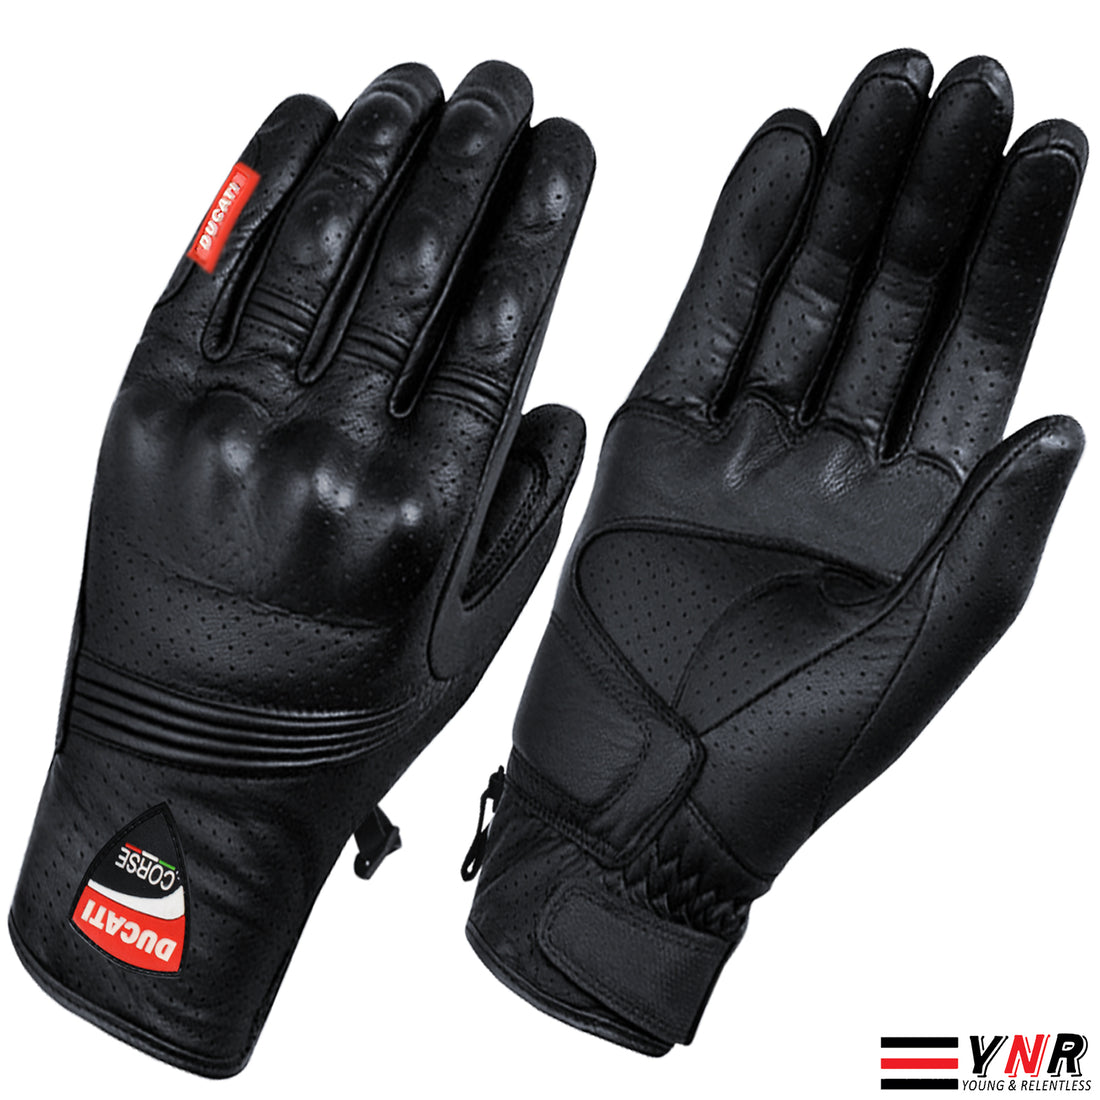 Ducati Corse New Leather Racing Motorbike Glove Pre-Curved Finger Motorcycle Glo